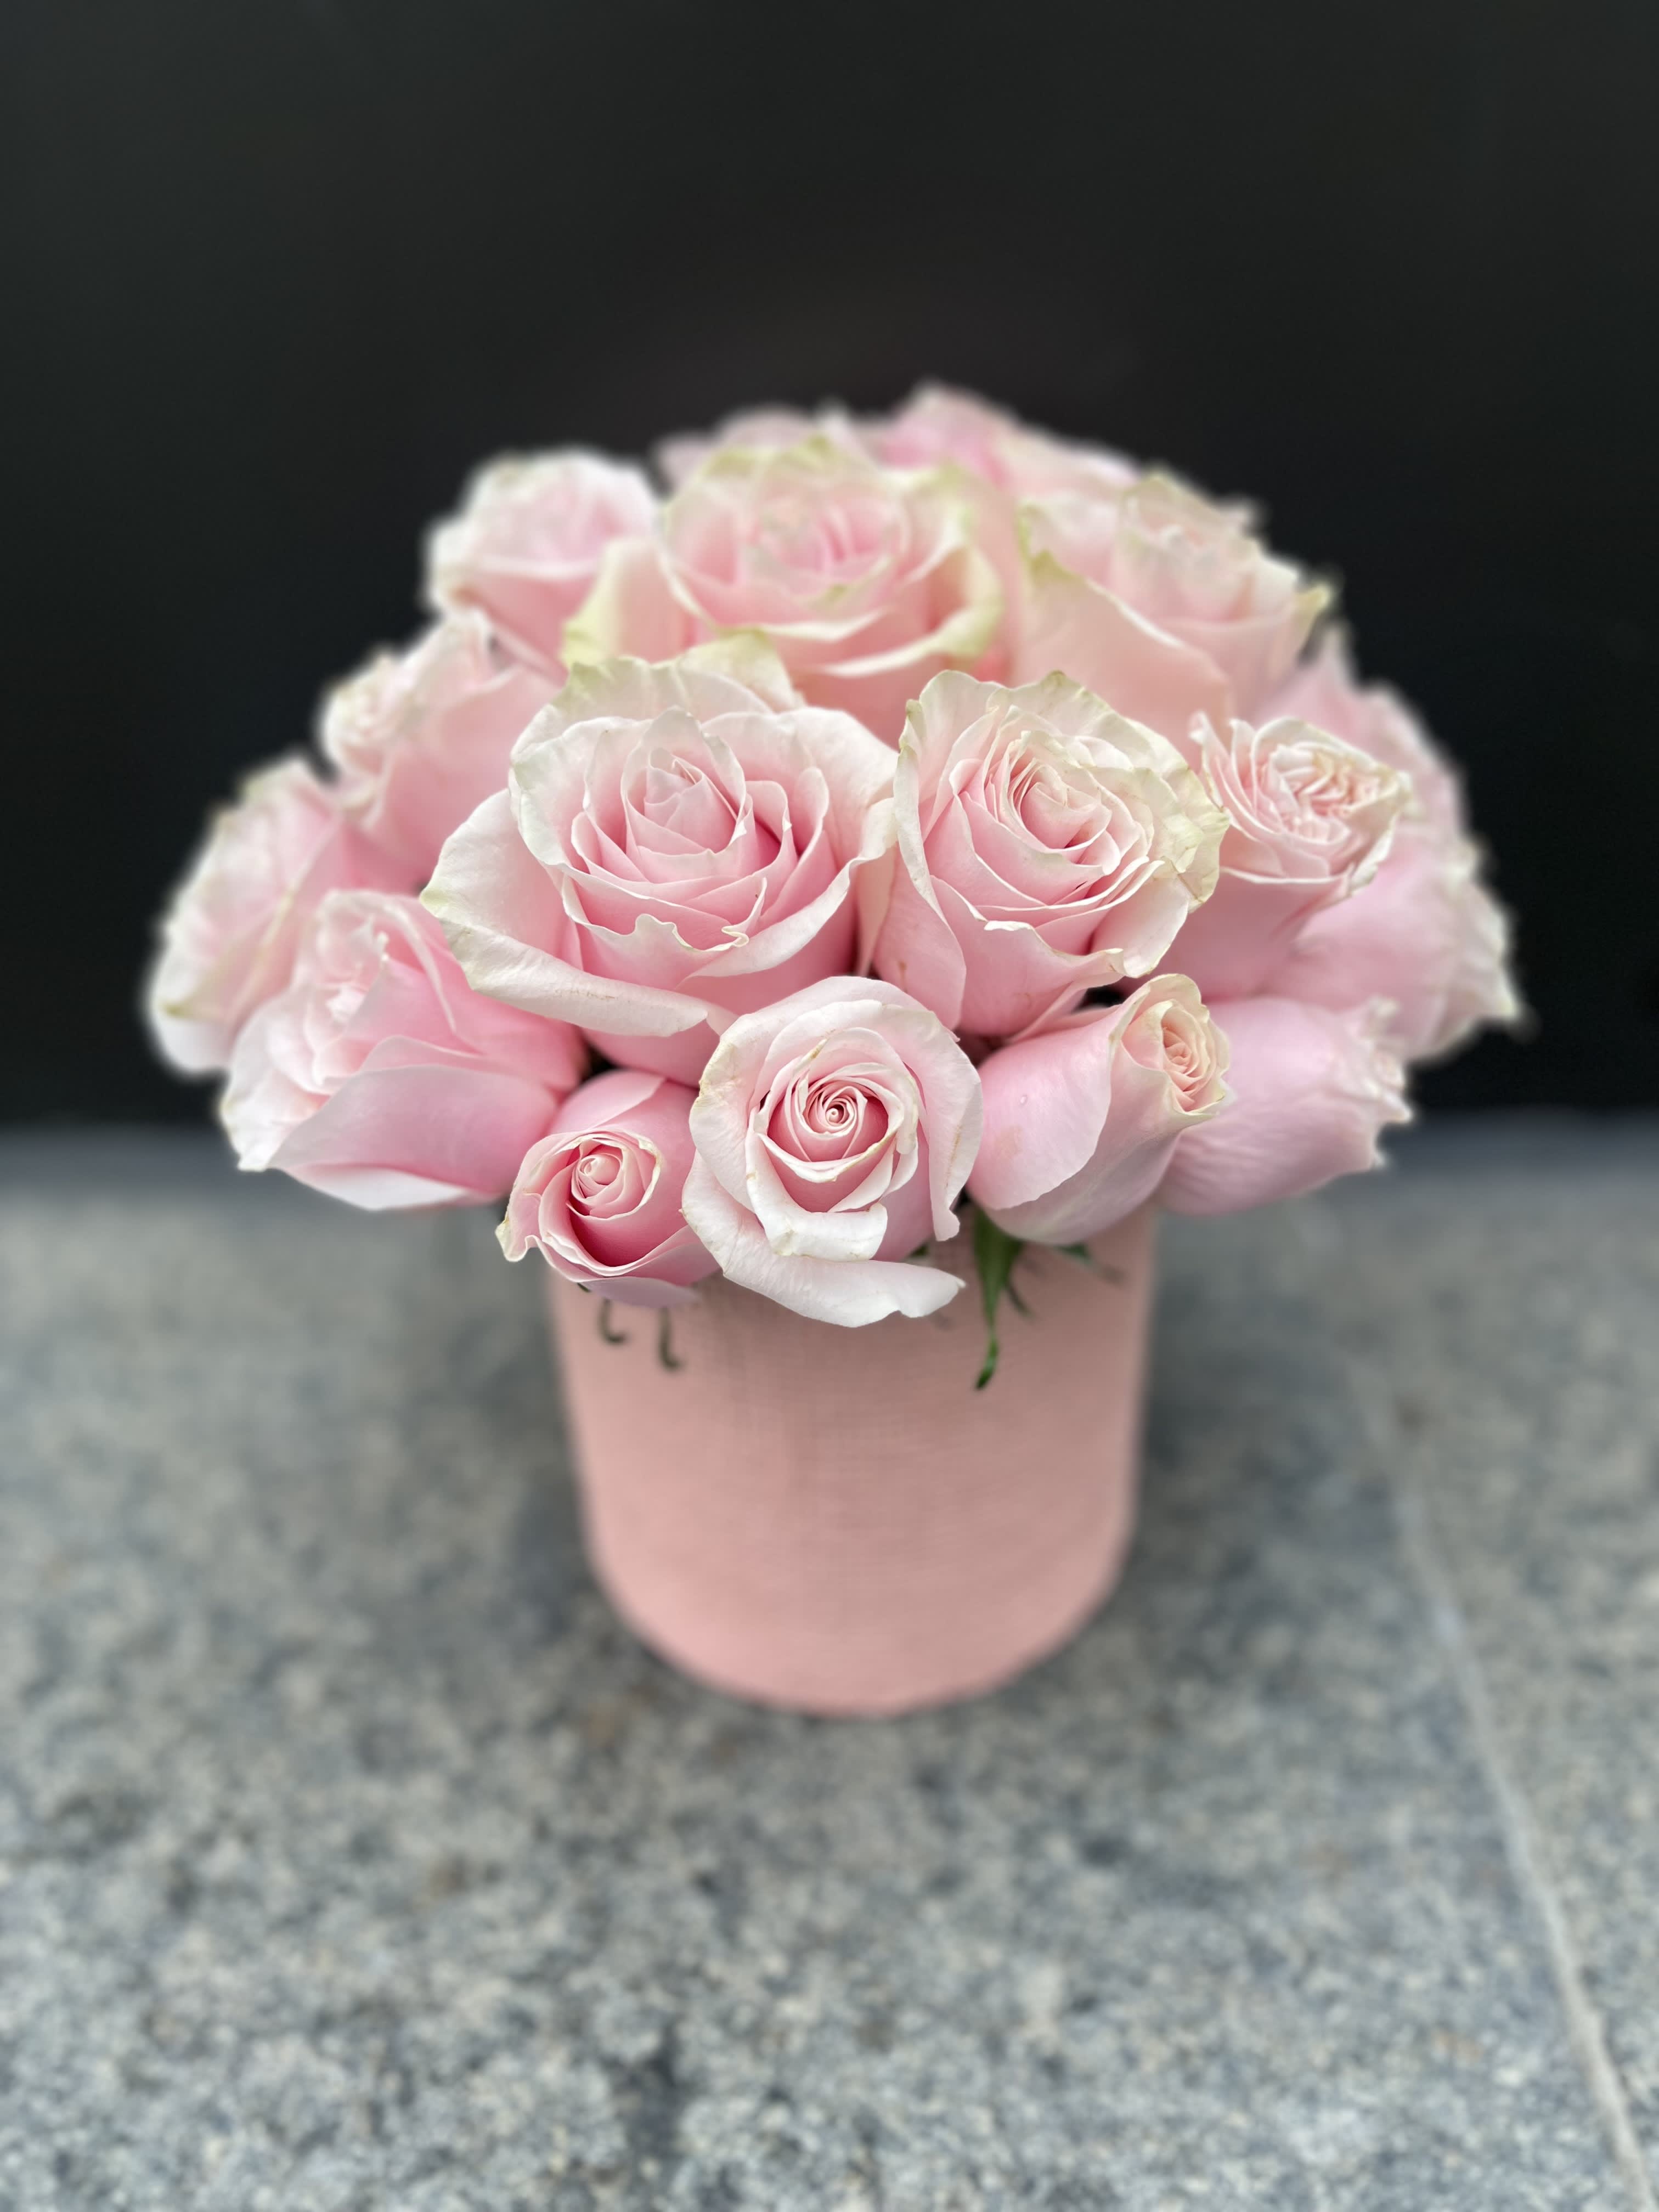 Sweetheart - Premium Pink Roses, pave design in a ceramic container (container may vary)